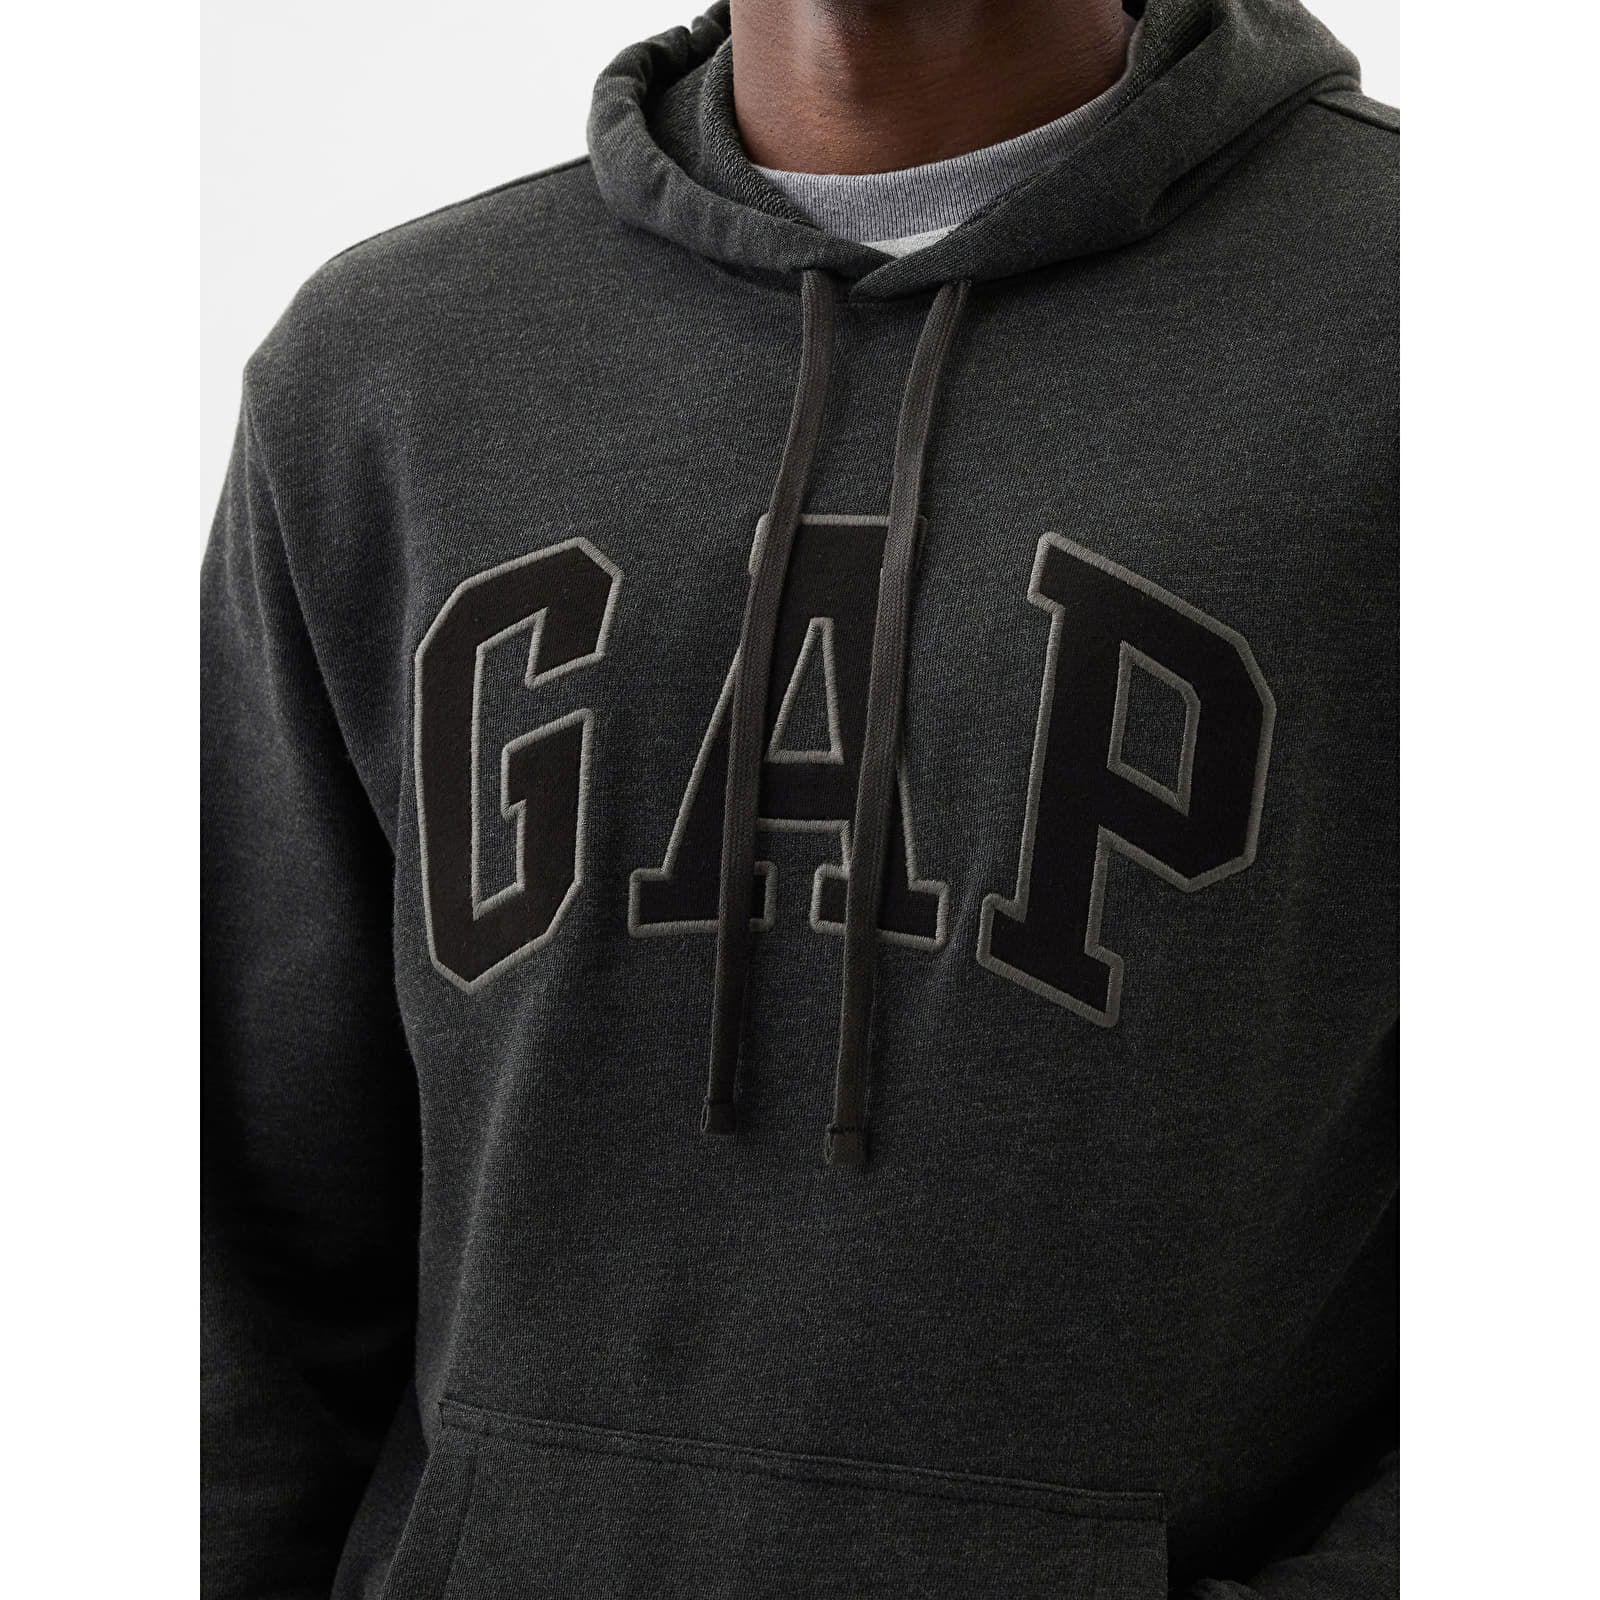 French Terry Pullover Logo Hoodie B85 Charcoal Heather